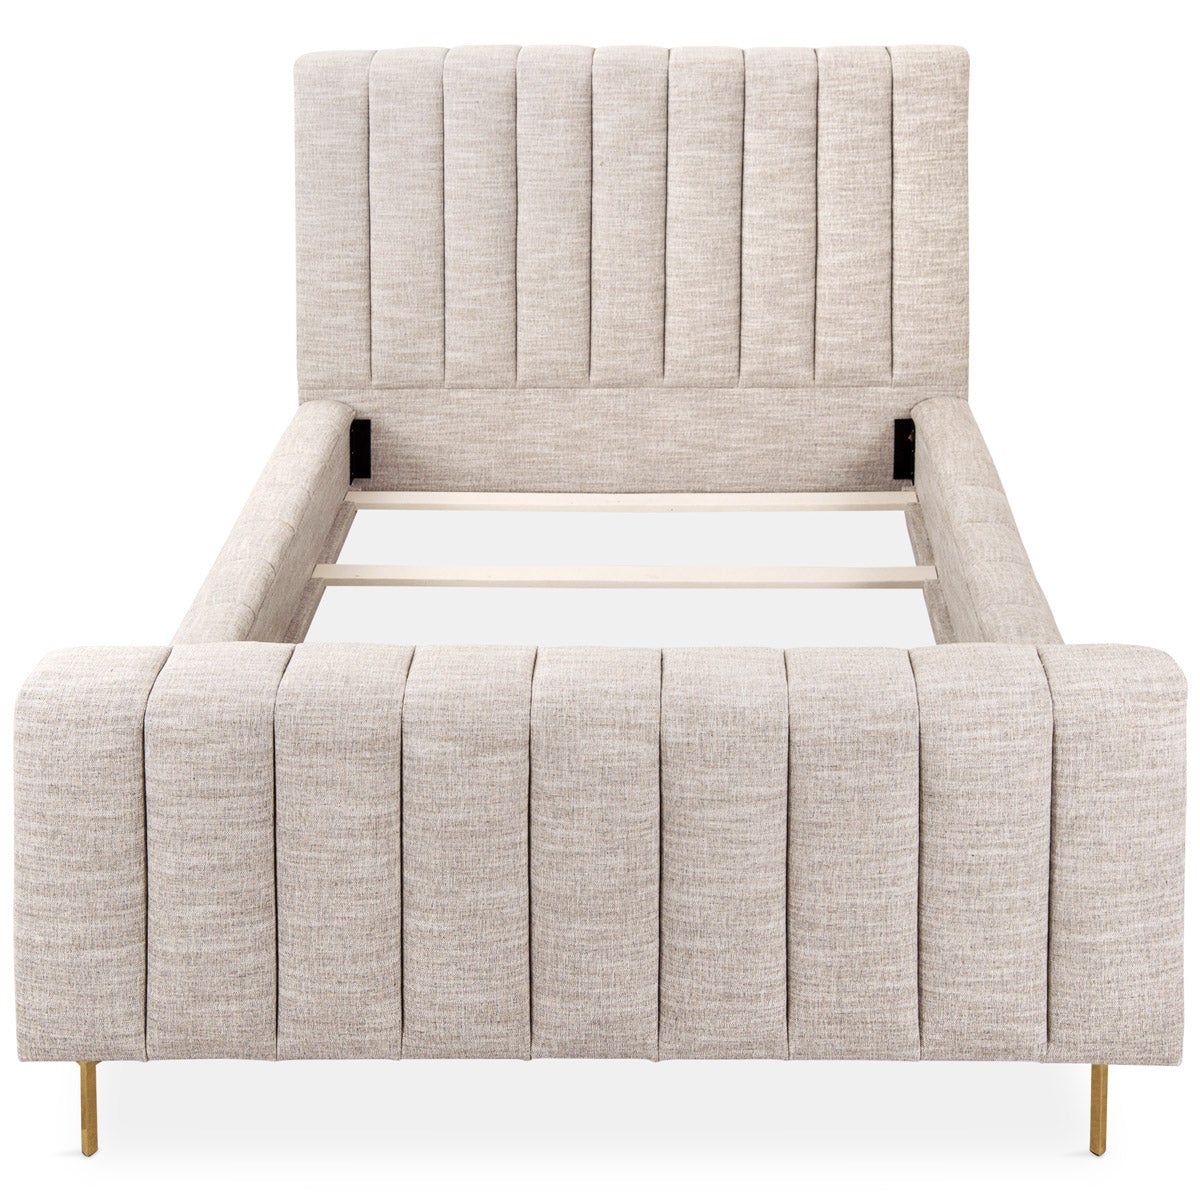 Shoreclub Bed with Footboard in Linen - ModShop1.com